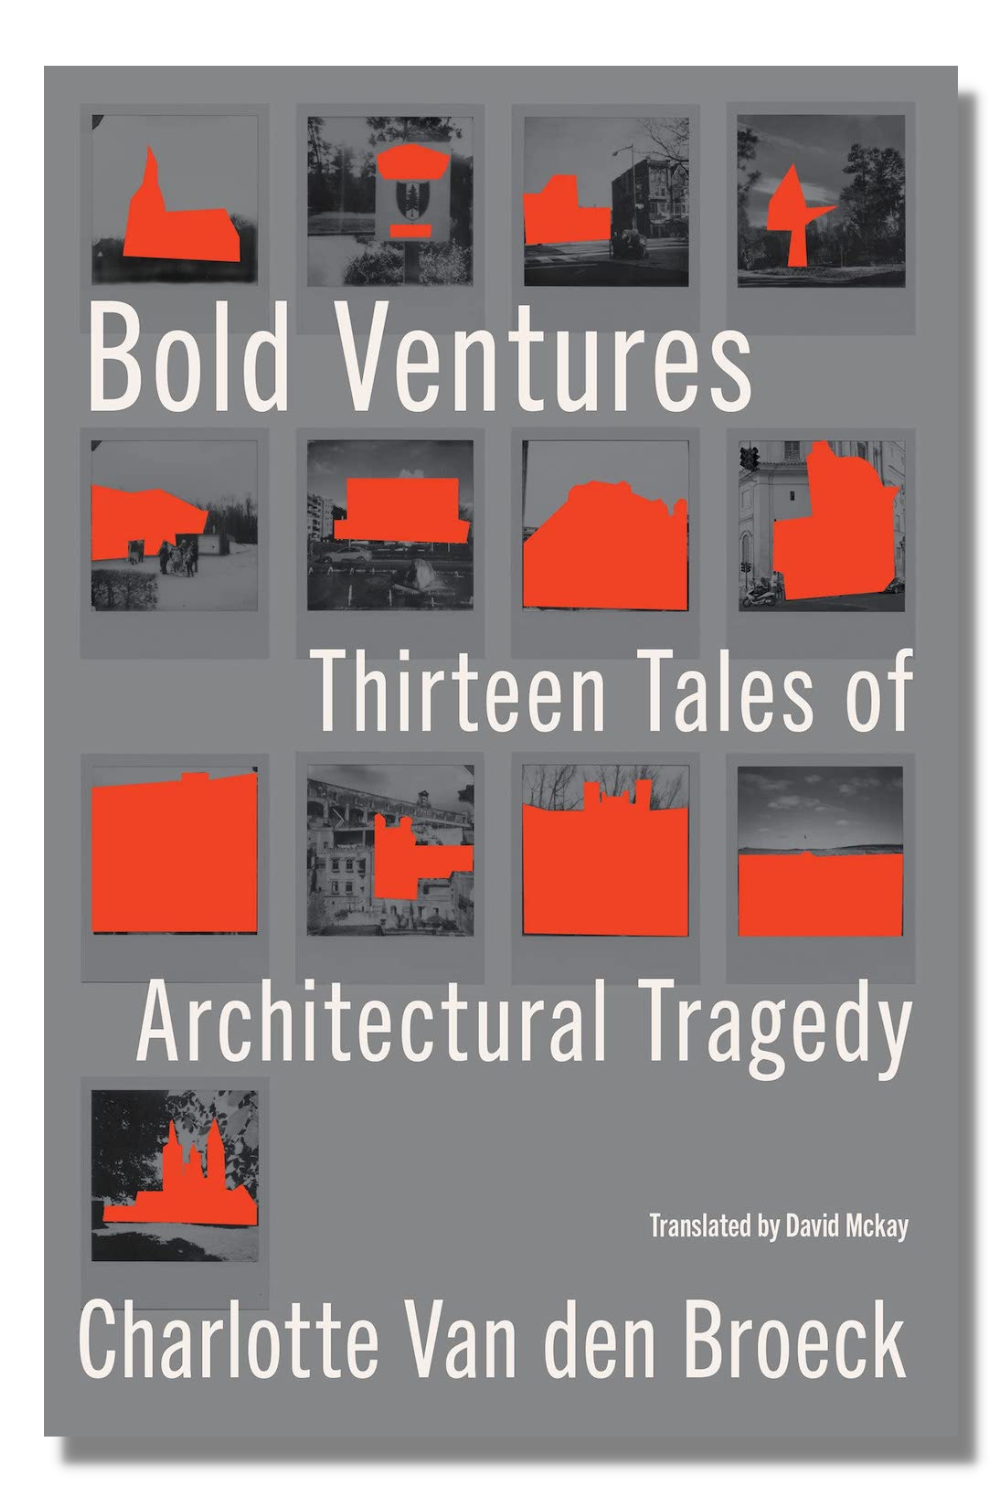 The cover of Charlotte Van den Broeck's "Bold Ventures: Thirteen Tales of Architectural Tragedy," tr. David McKay